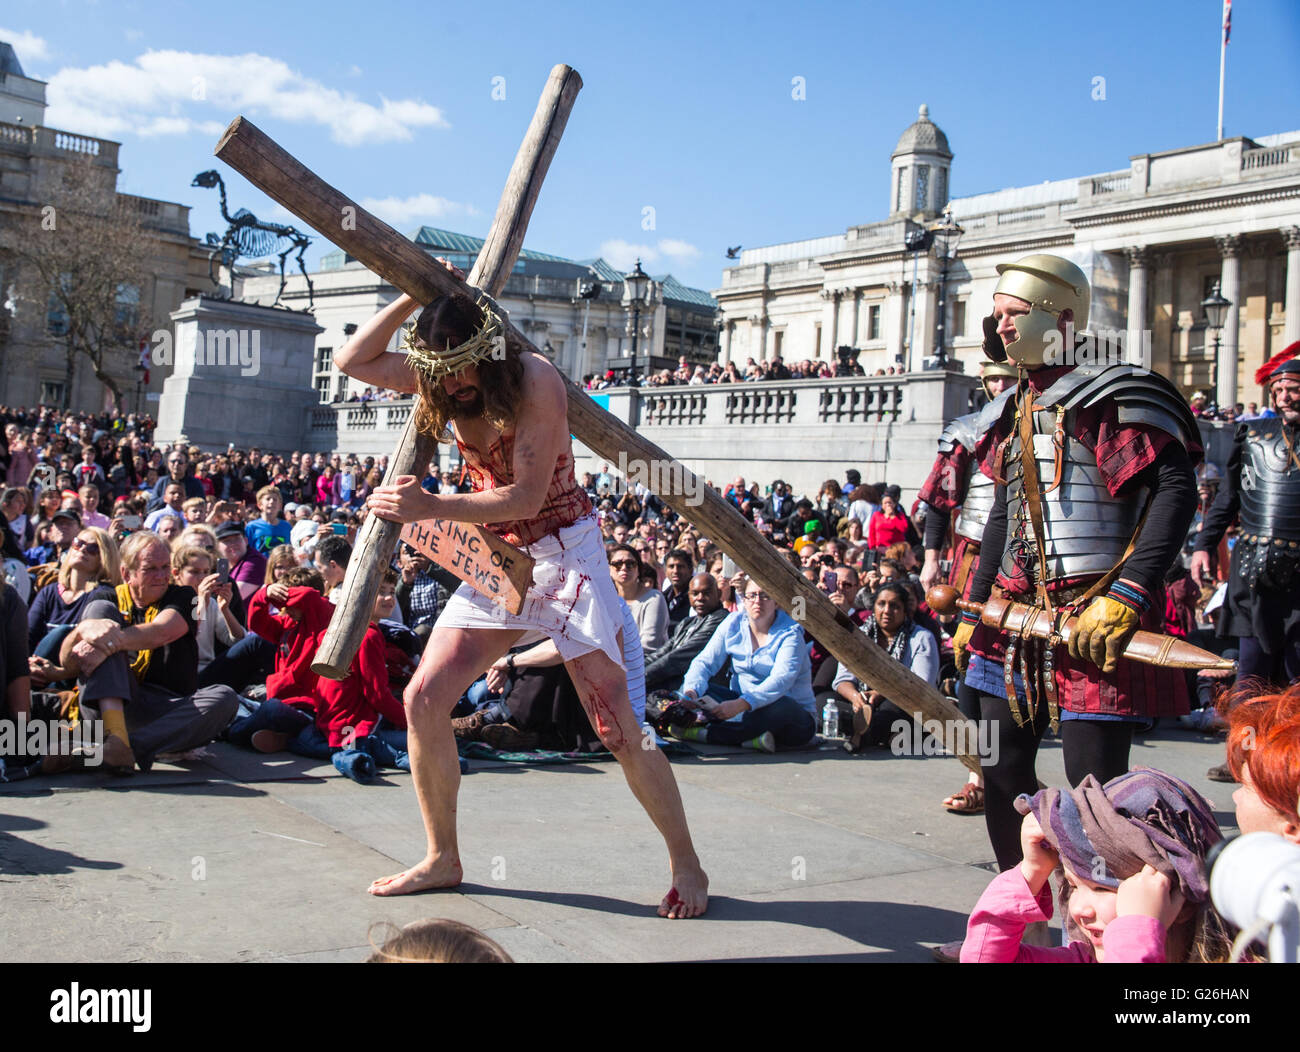 Actor James Burke-Dunsmore plays Jesus, during 'The Passion of Christ' at Trafalgar Square in London, Britain. Stock Photo